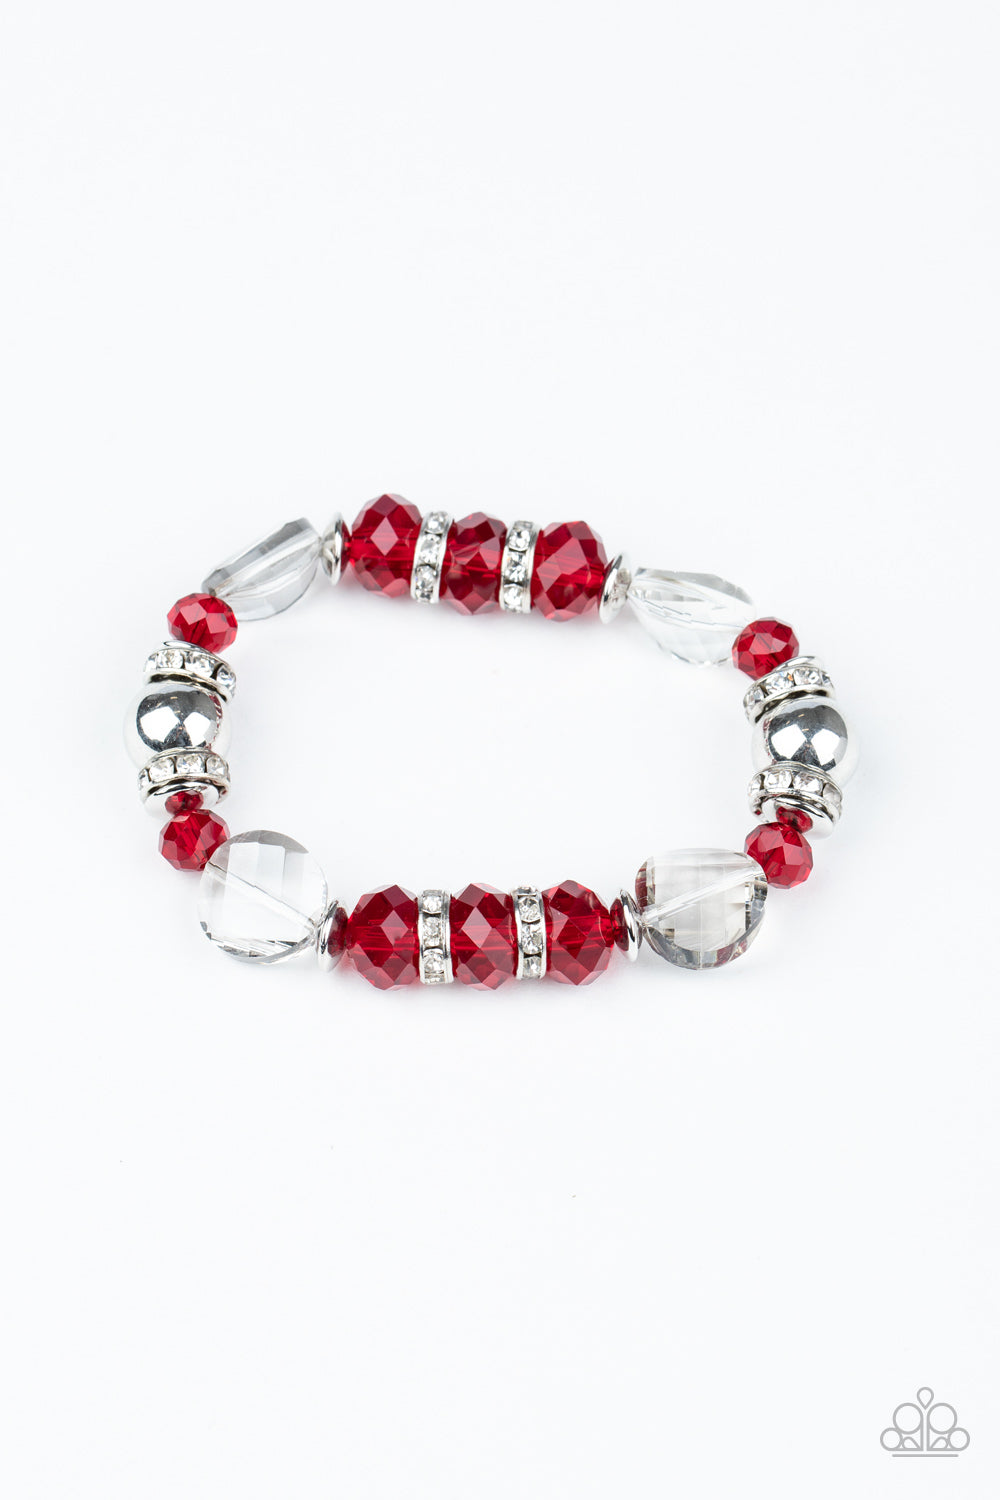 A glamorous collection of white rhinestone encrusted rings, silver beads, glassy white gems, and glittery red crystal-like beads are threaded along a stretchy band around the wrist for a refined flair.